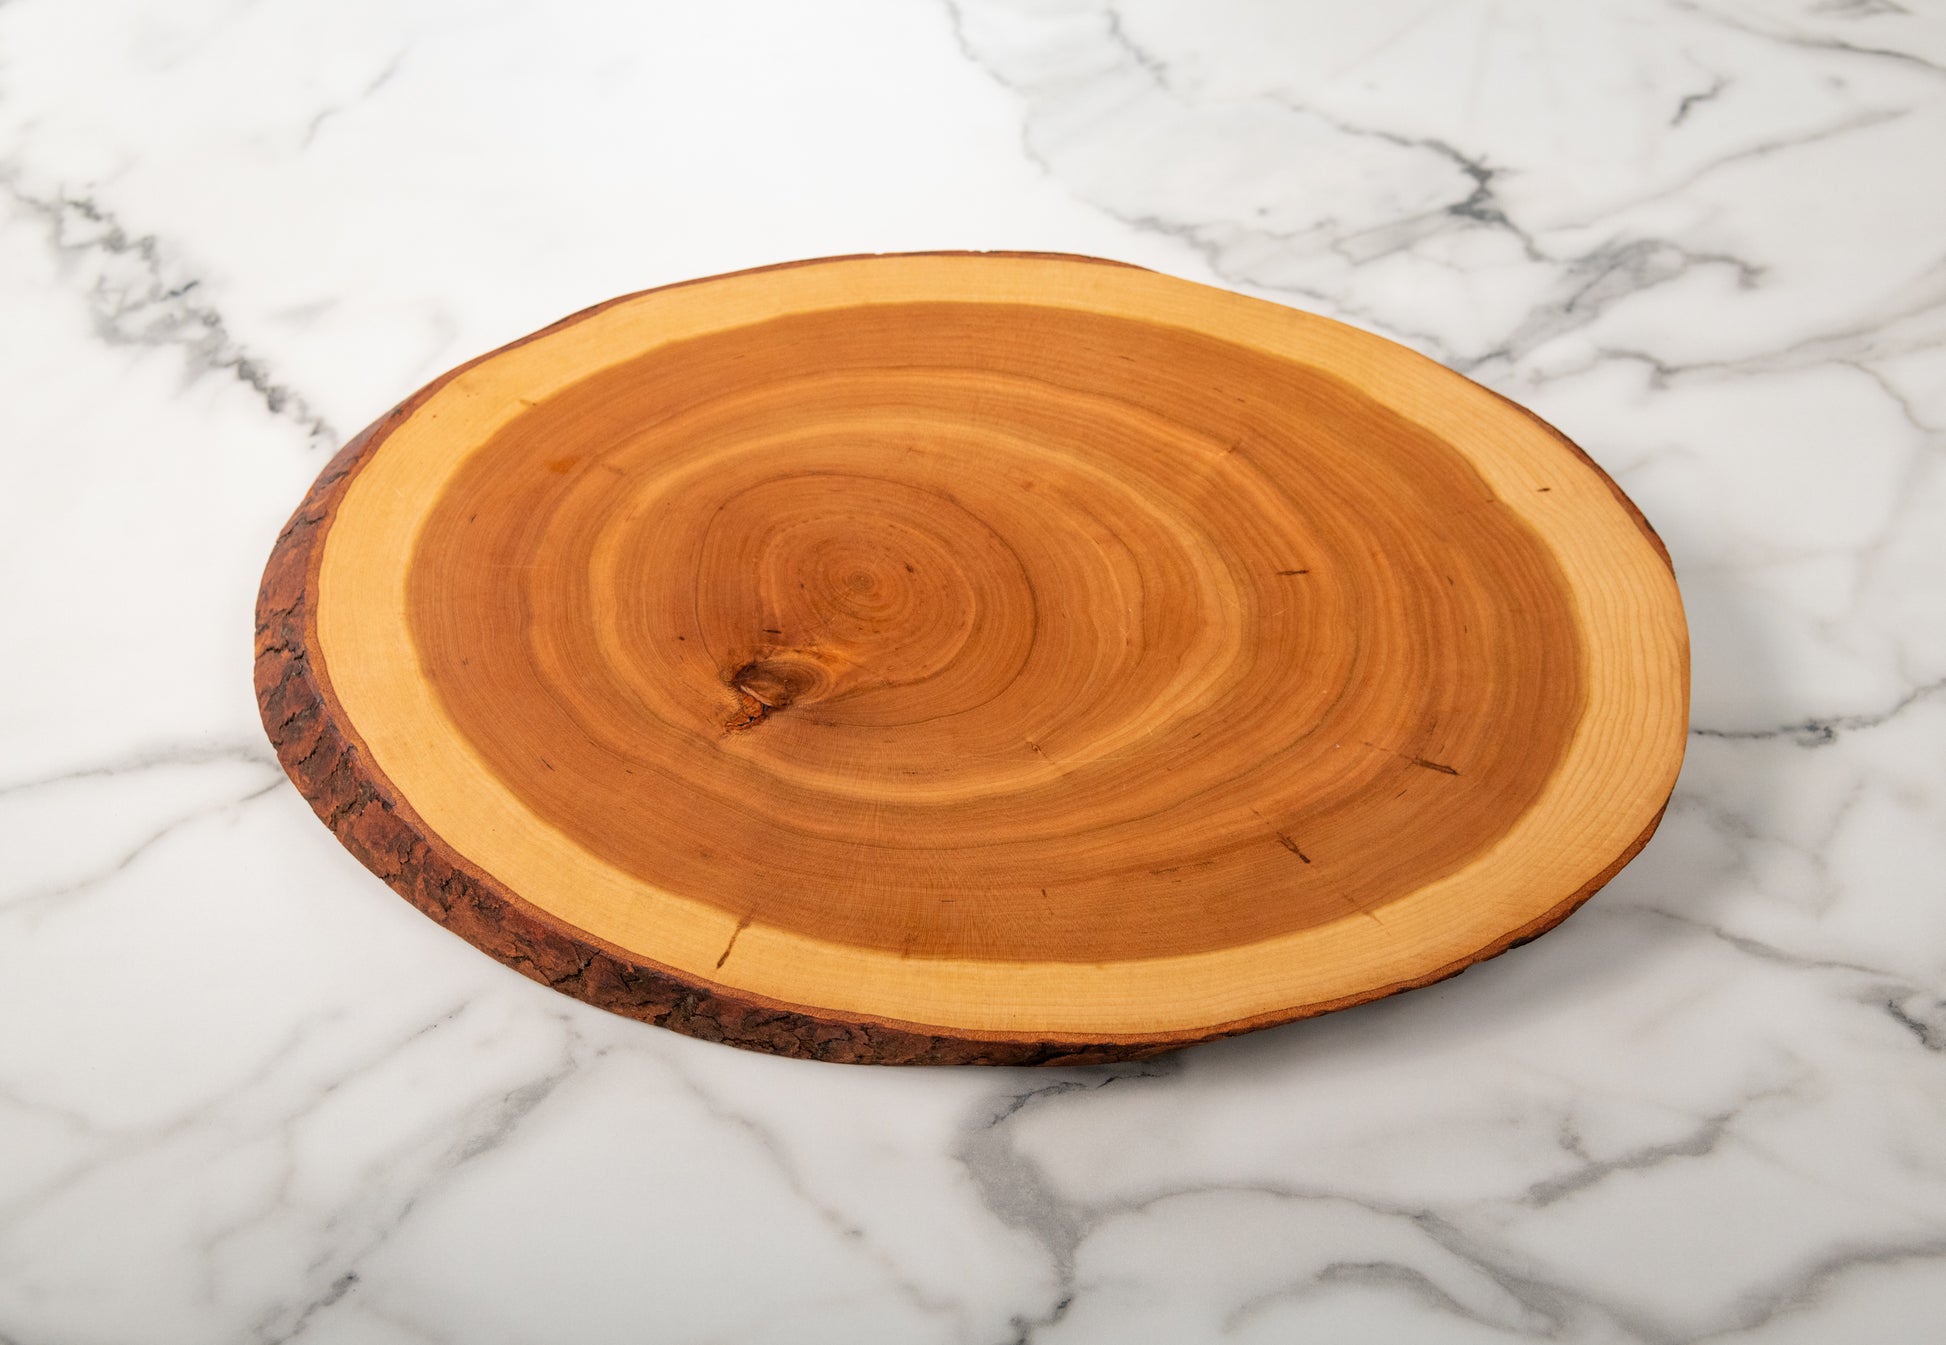 Medium Cherry Charcuterie Board with small knot